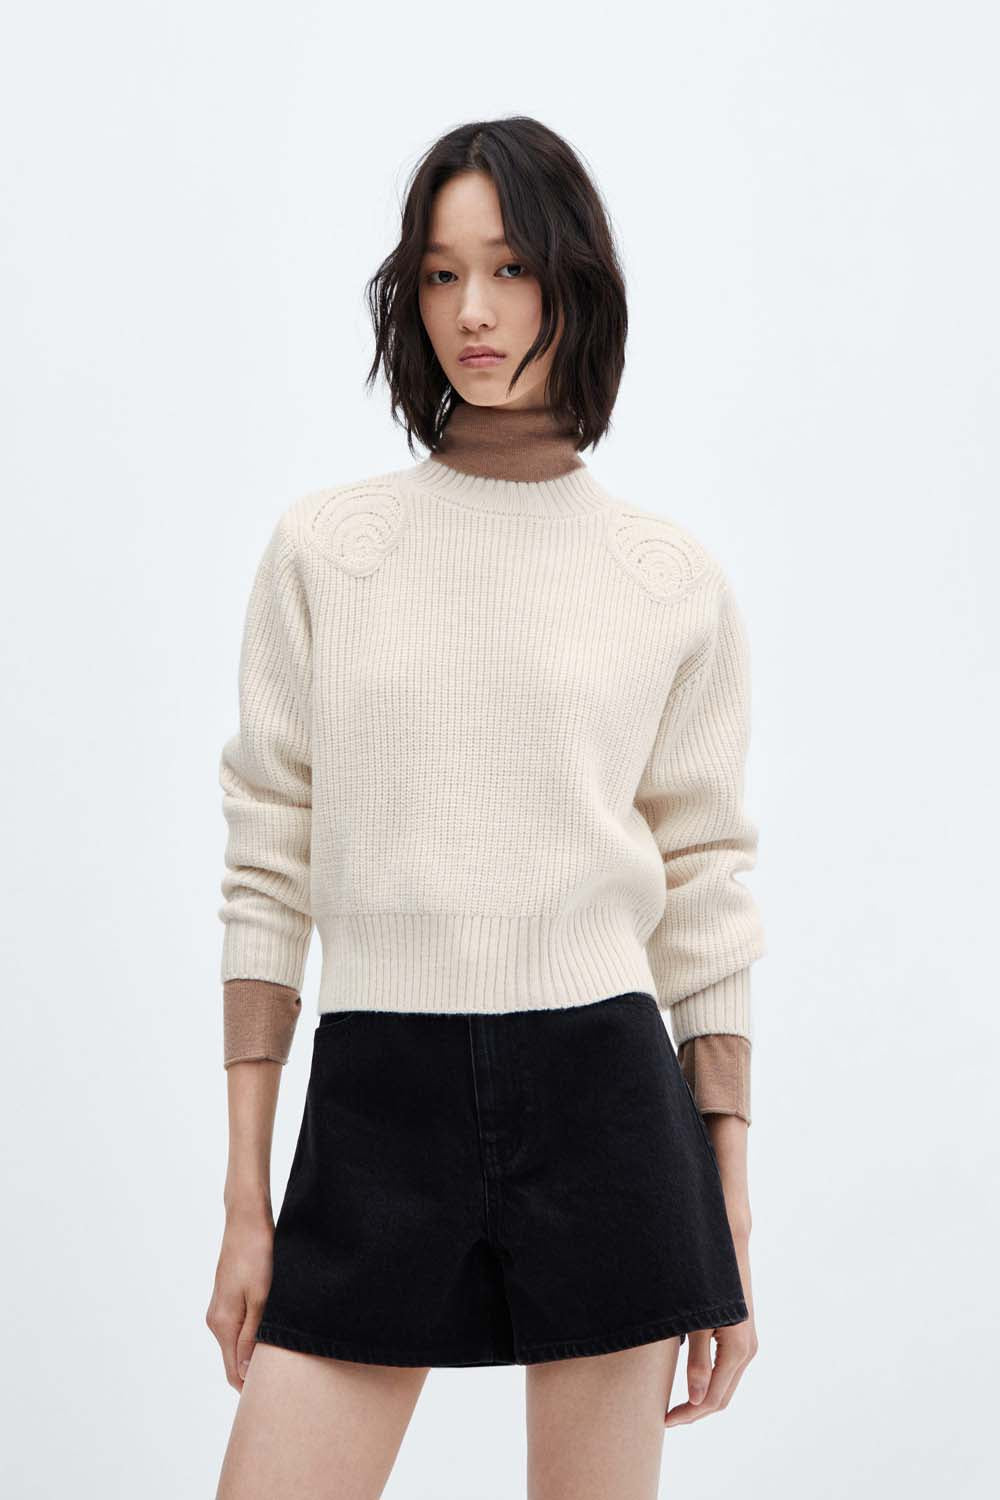 Mango Perkins neck sweater with shoulder detail 1 Shaws Department Stores